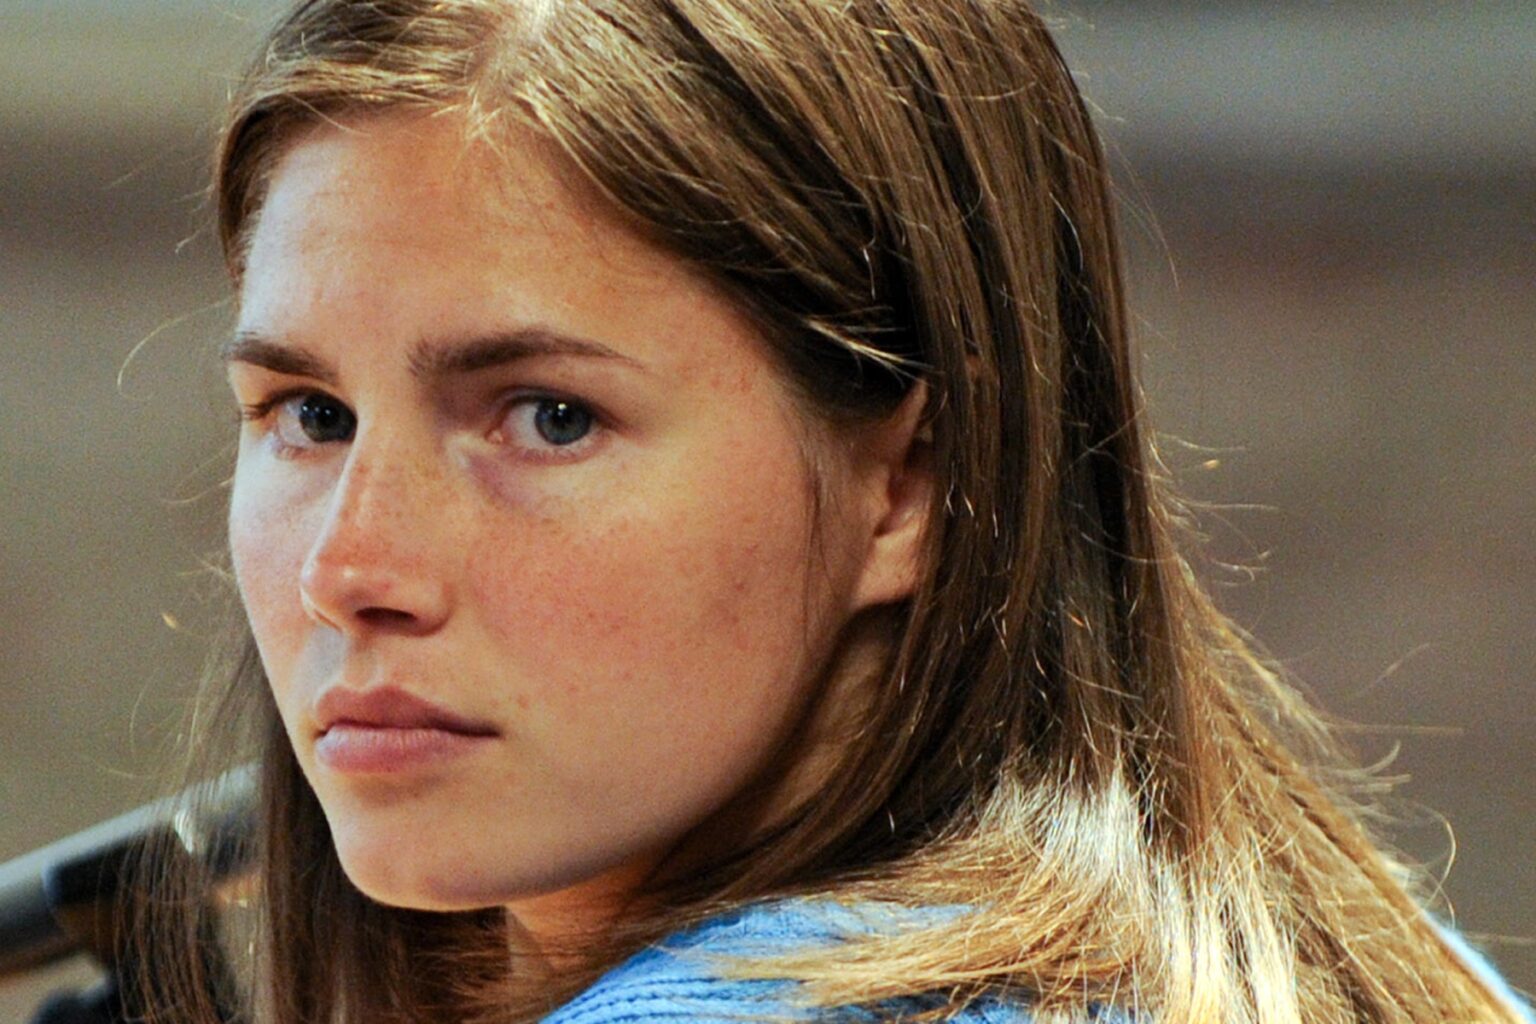 Amanda Knox says she has contacted family of murdered roommate Meredith Kercher